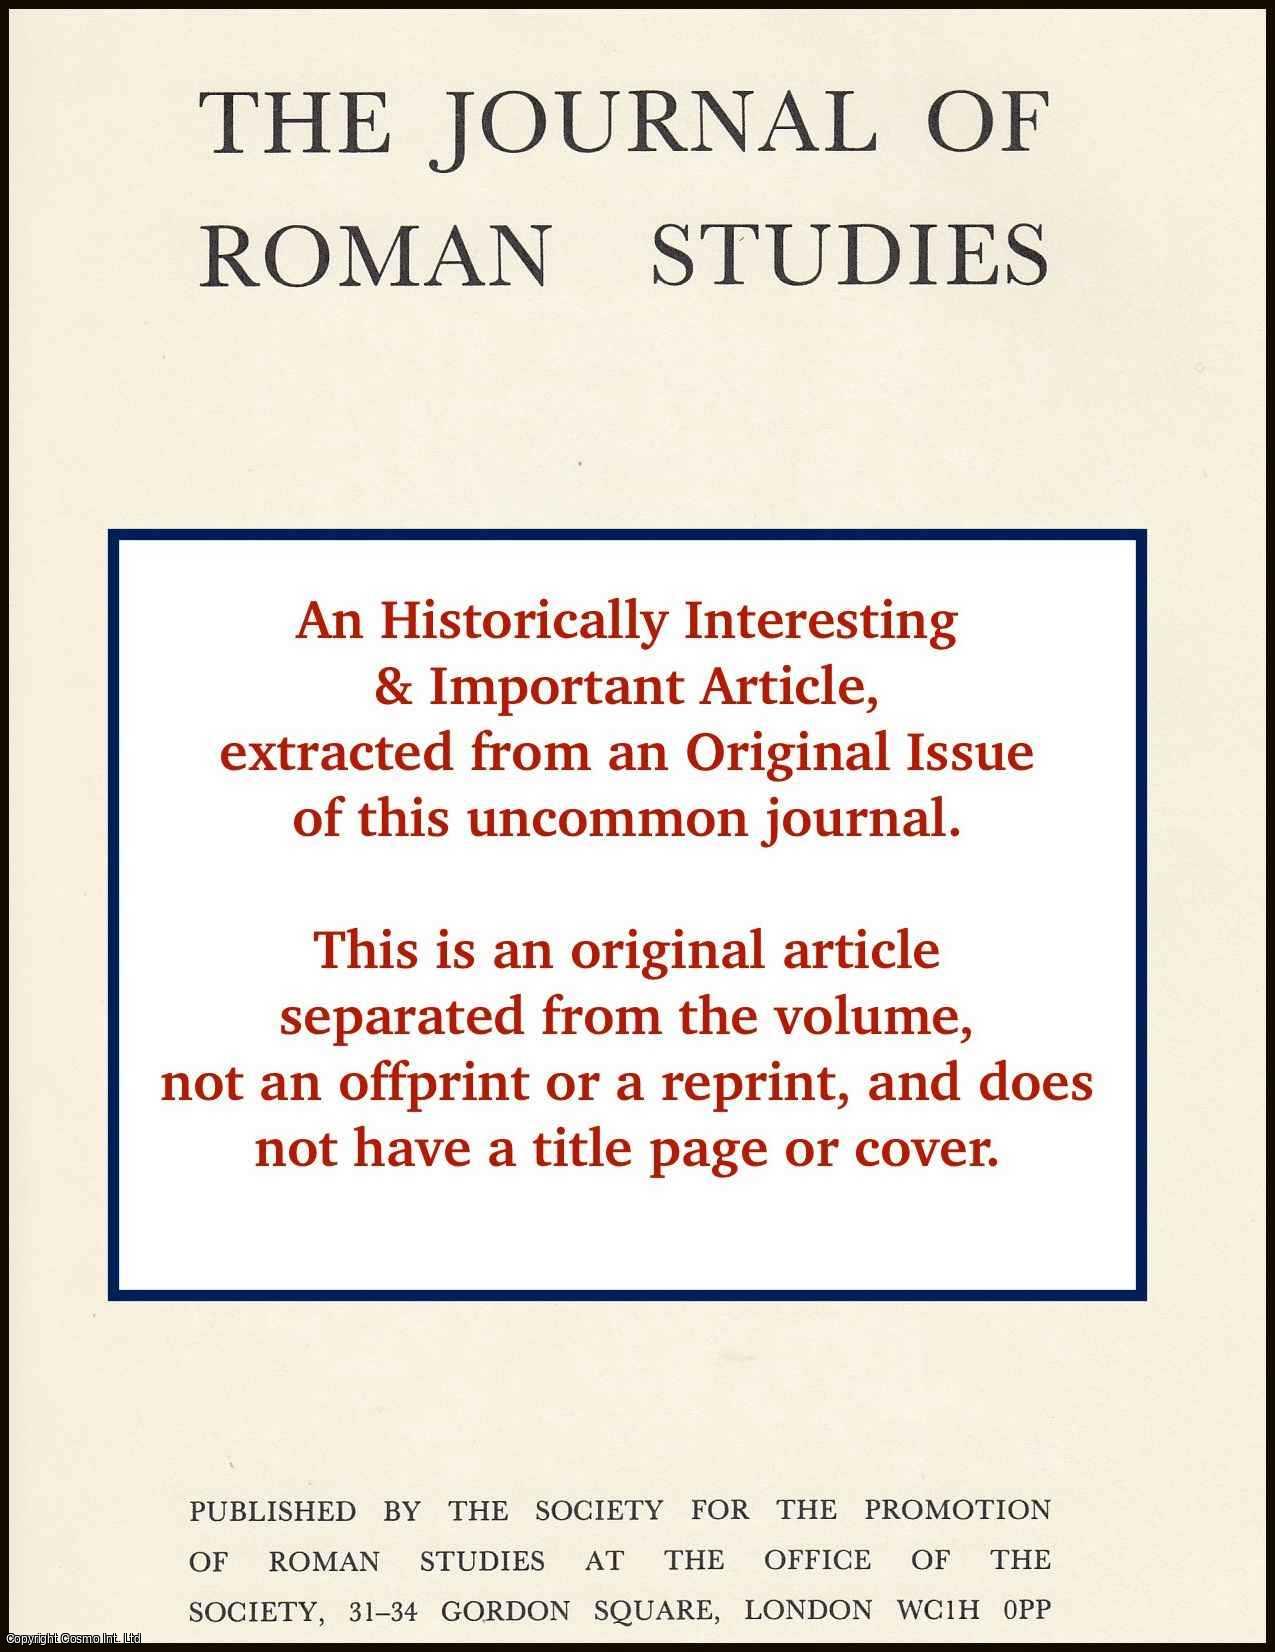 A.M. Honore - Some Constitutions Composed by Justinian. An original article from the Journal of Roman Studies, 1975.